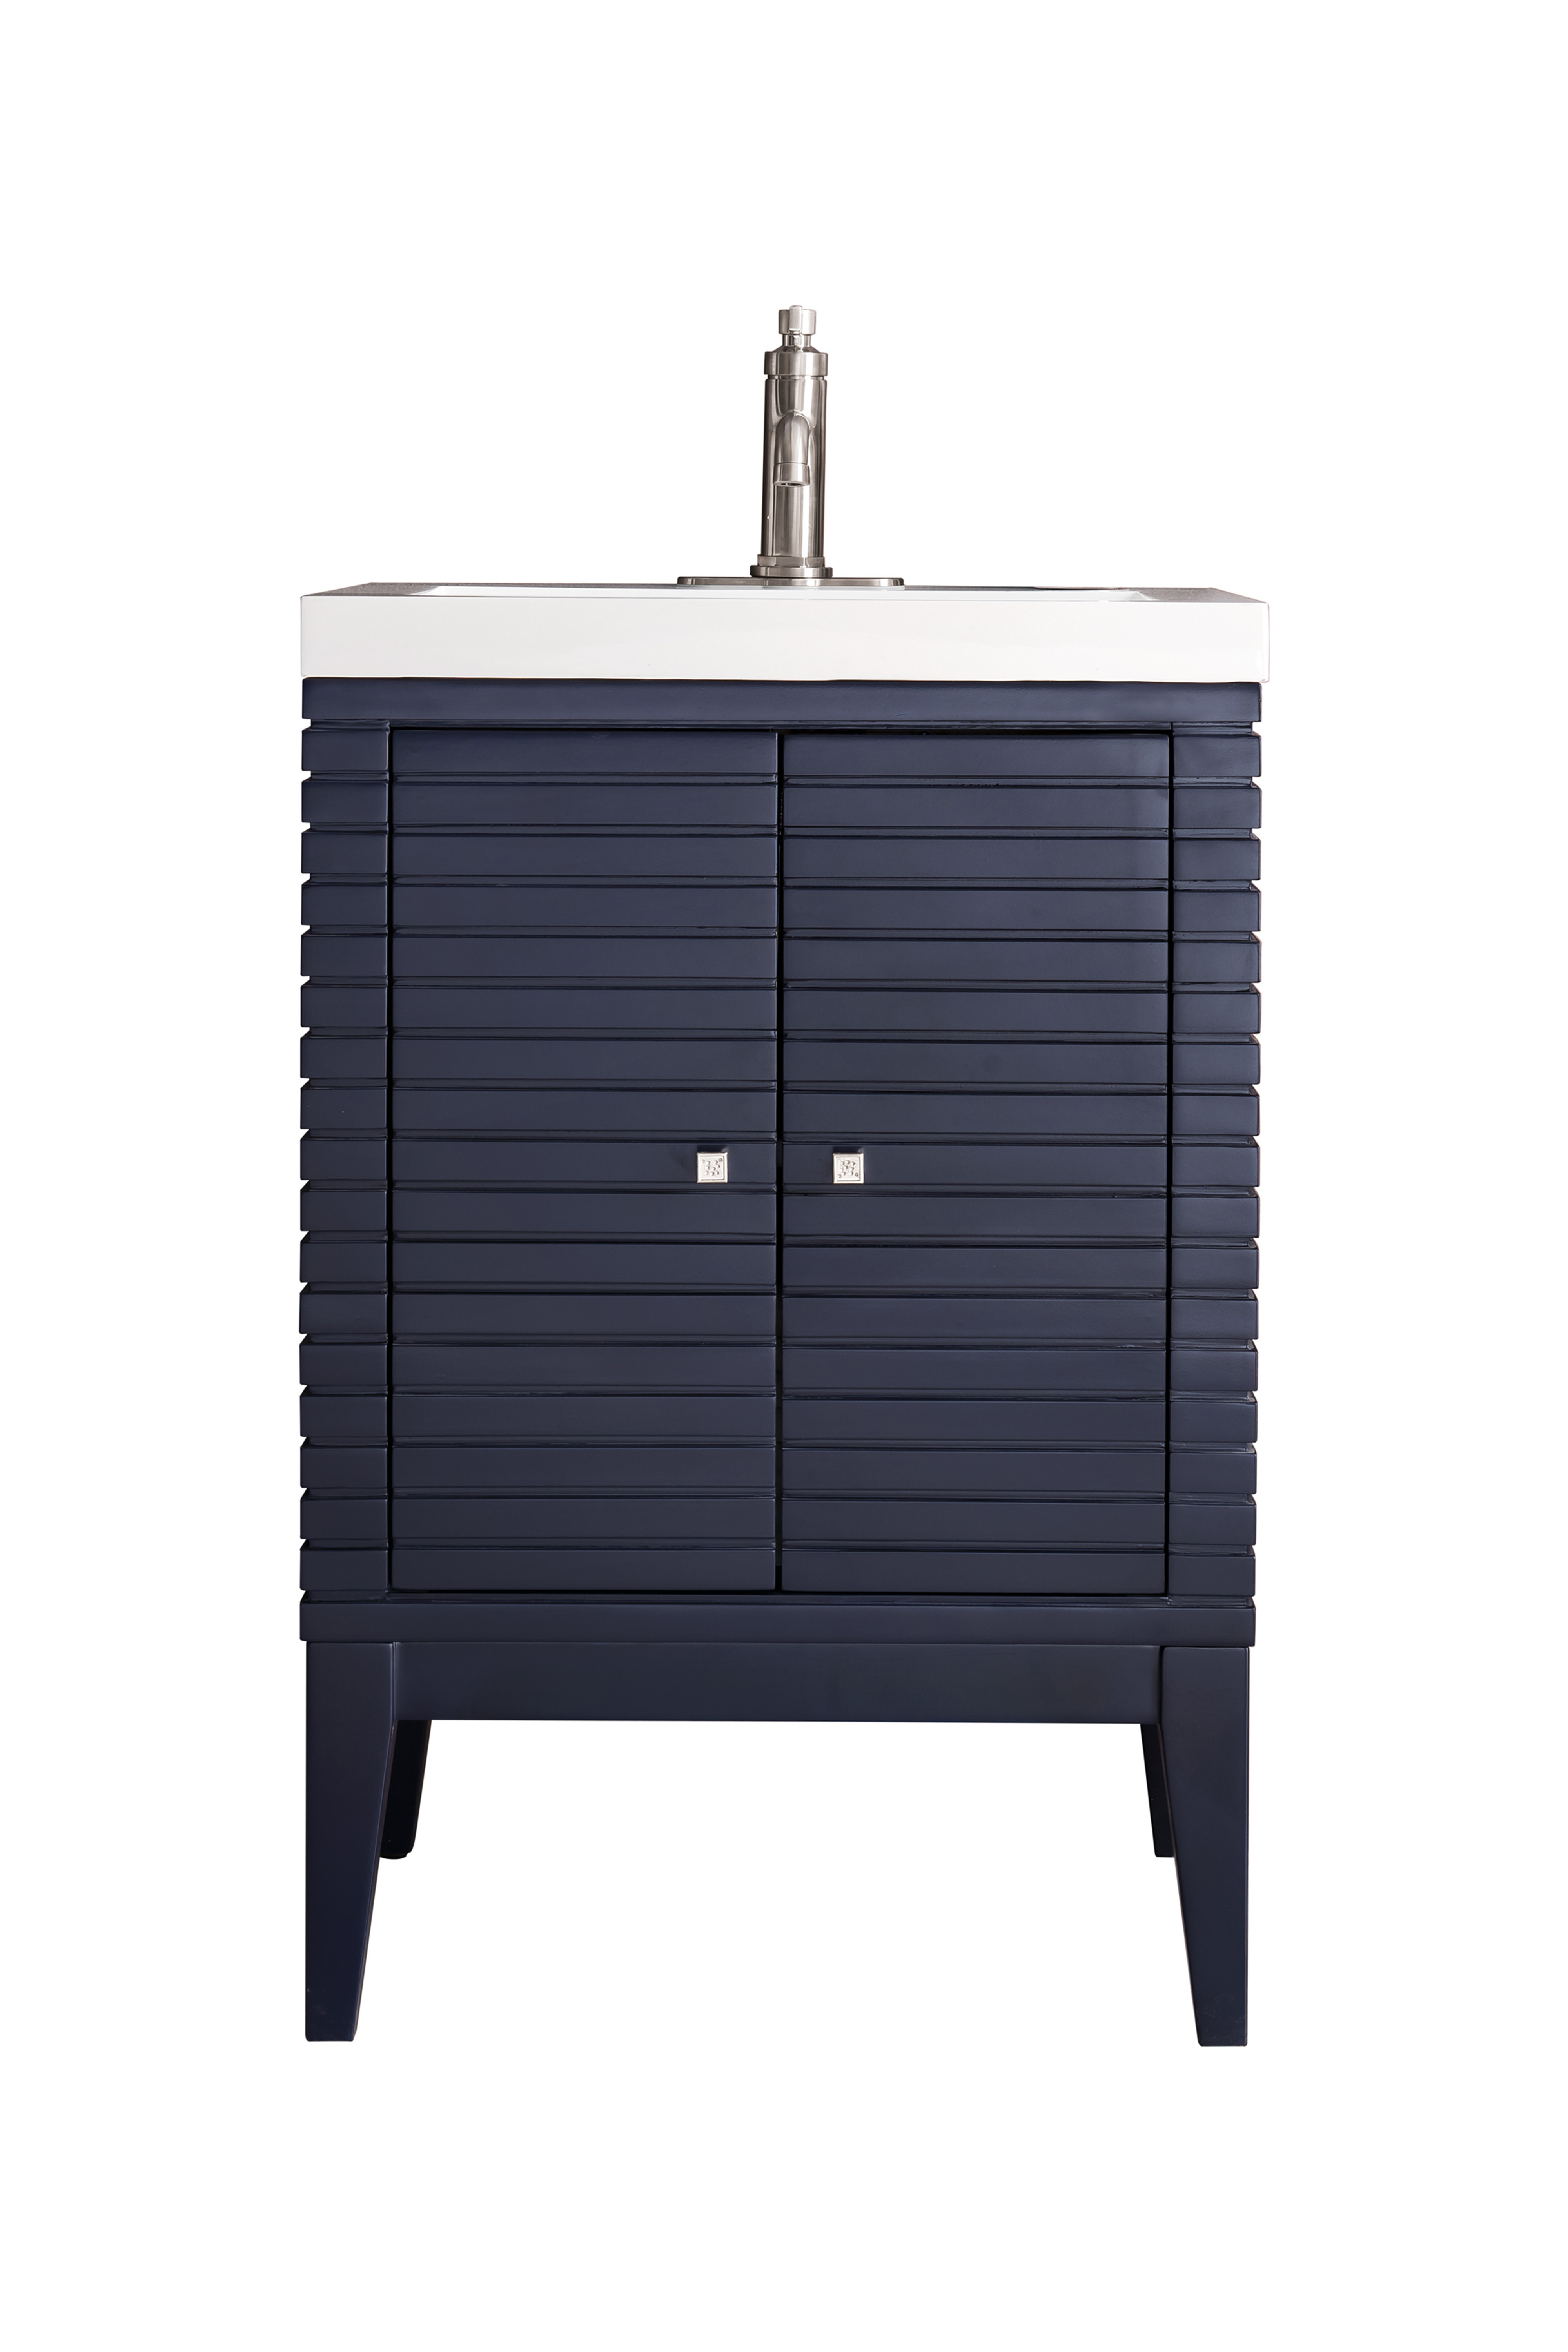 James Martin E213V24NVBWG Linden 24" Single Vanity Cabinet, Navy Blue w/ White Glossy Composite Countertop - Click Image to Close